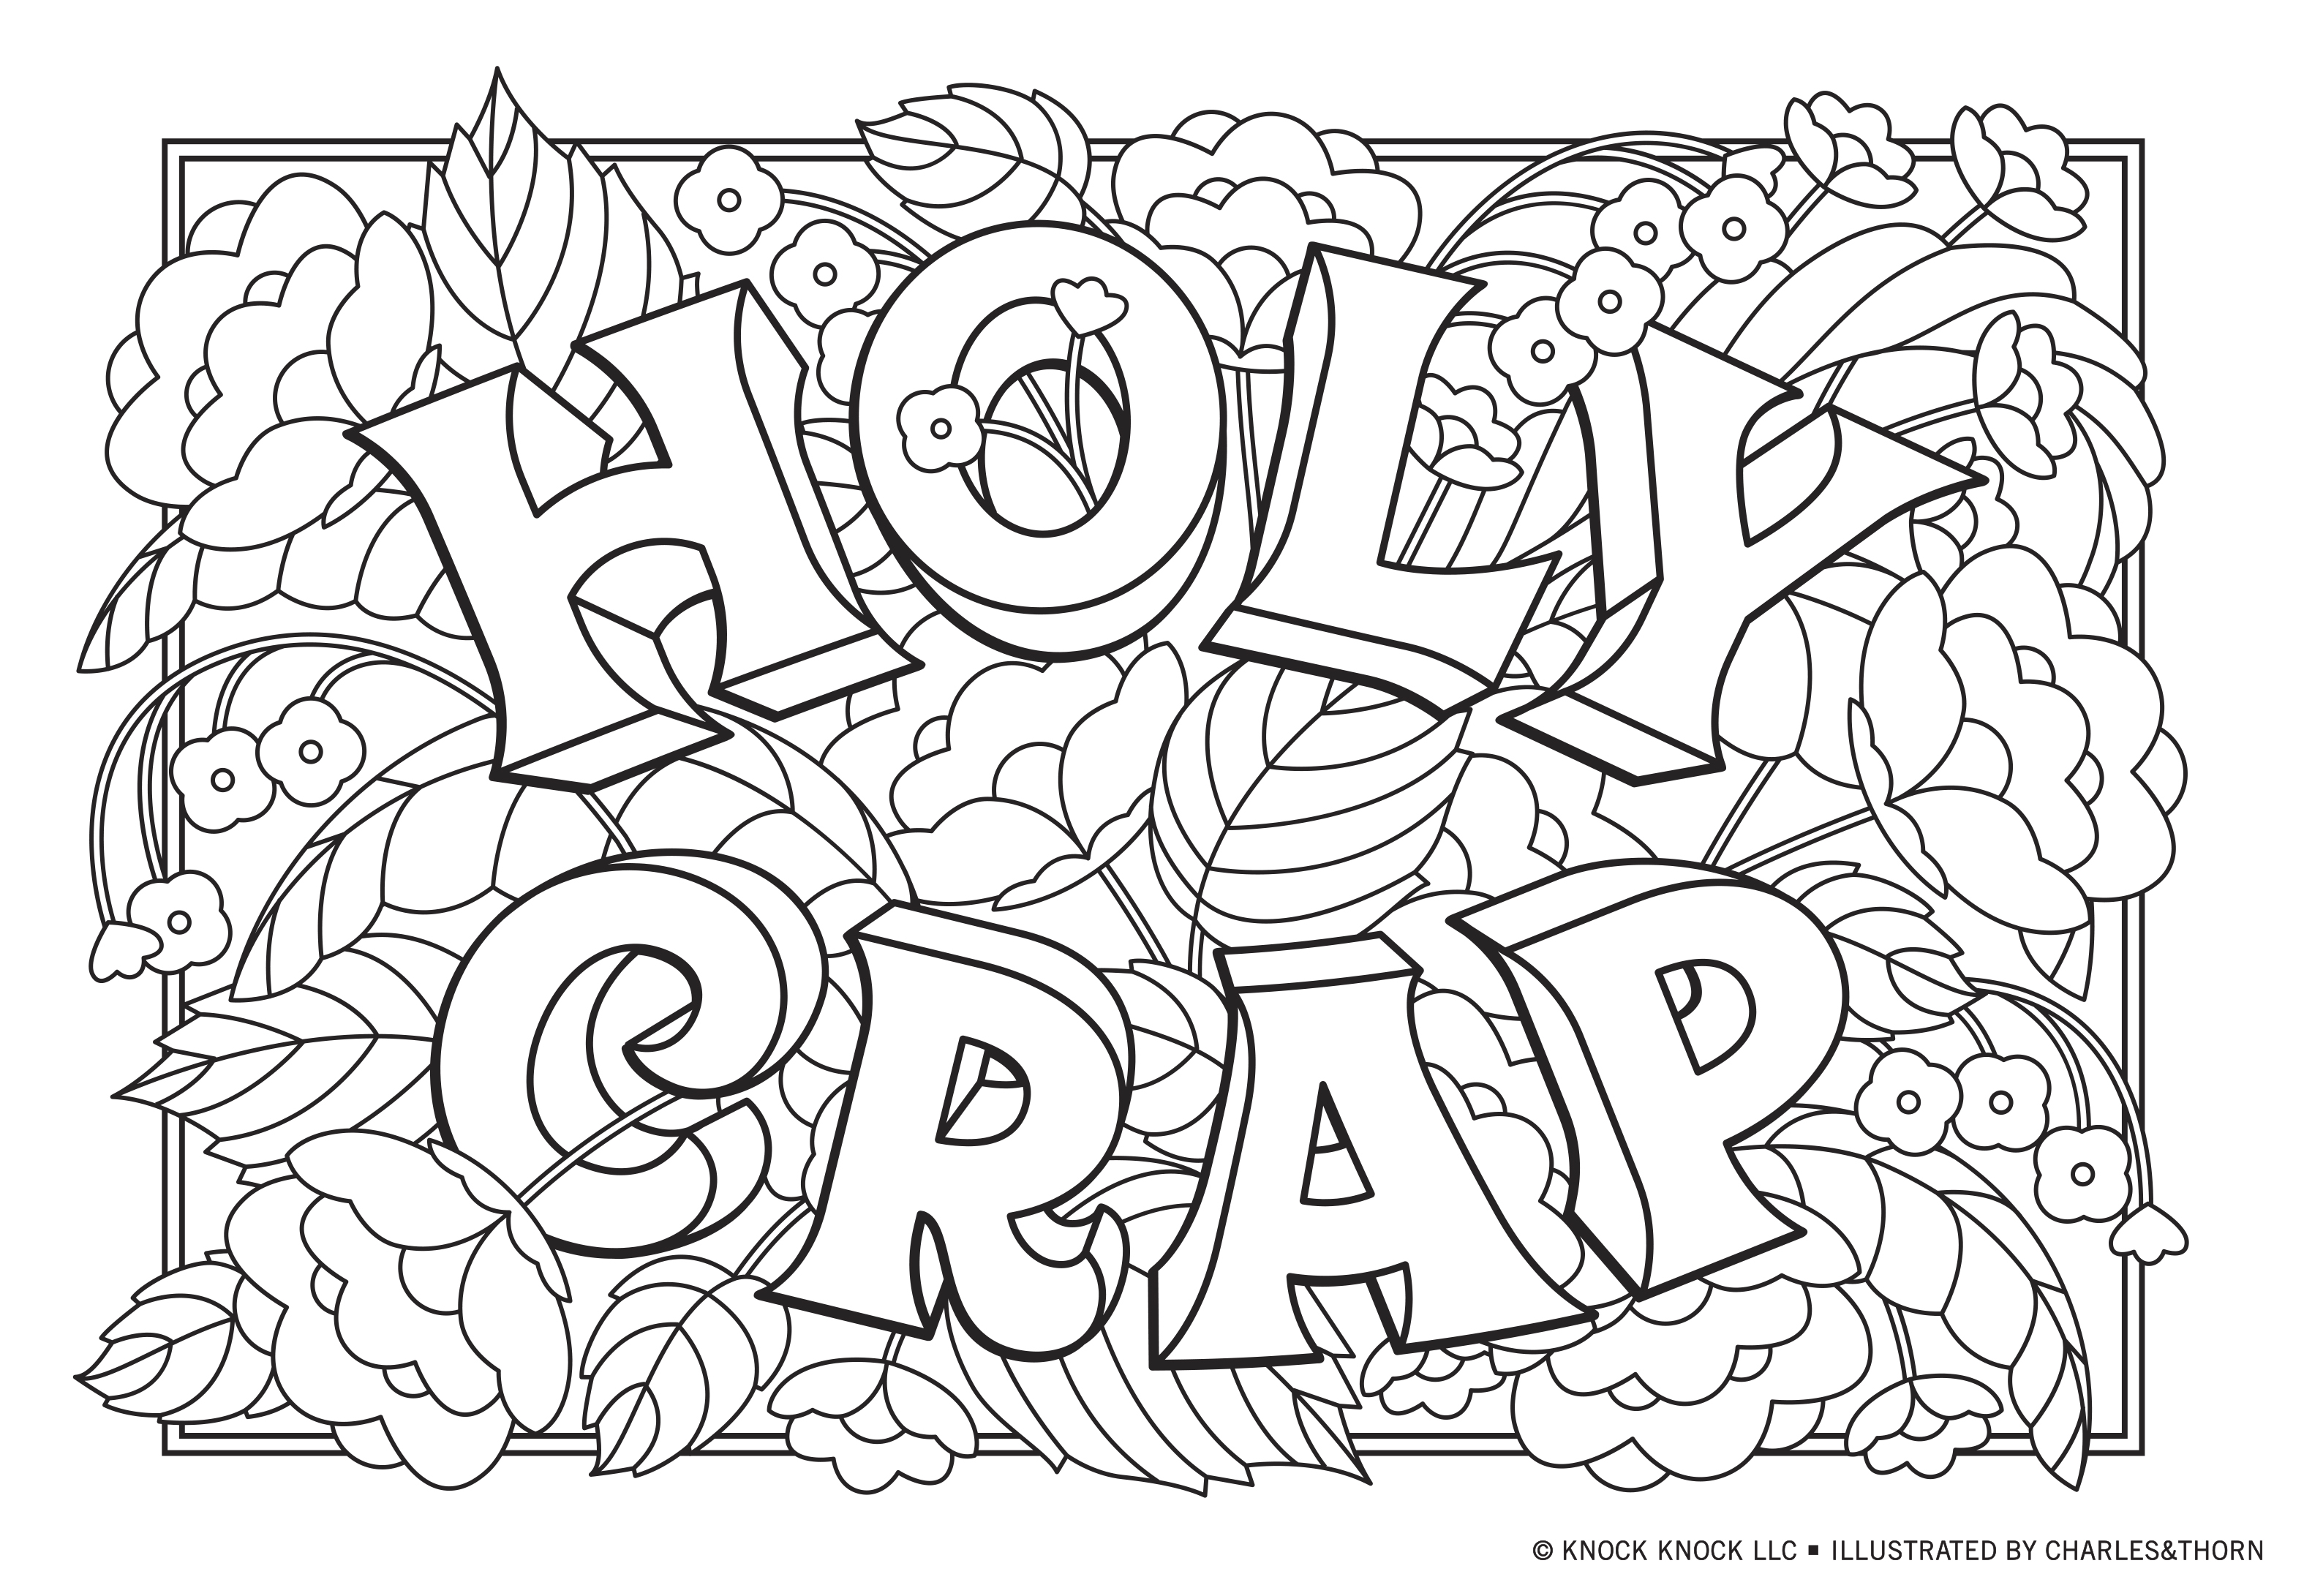 Funny Printable Coloring Pages for Adults by Knock Knock